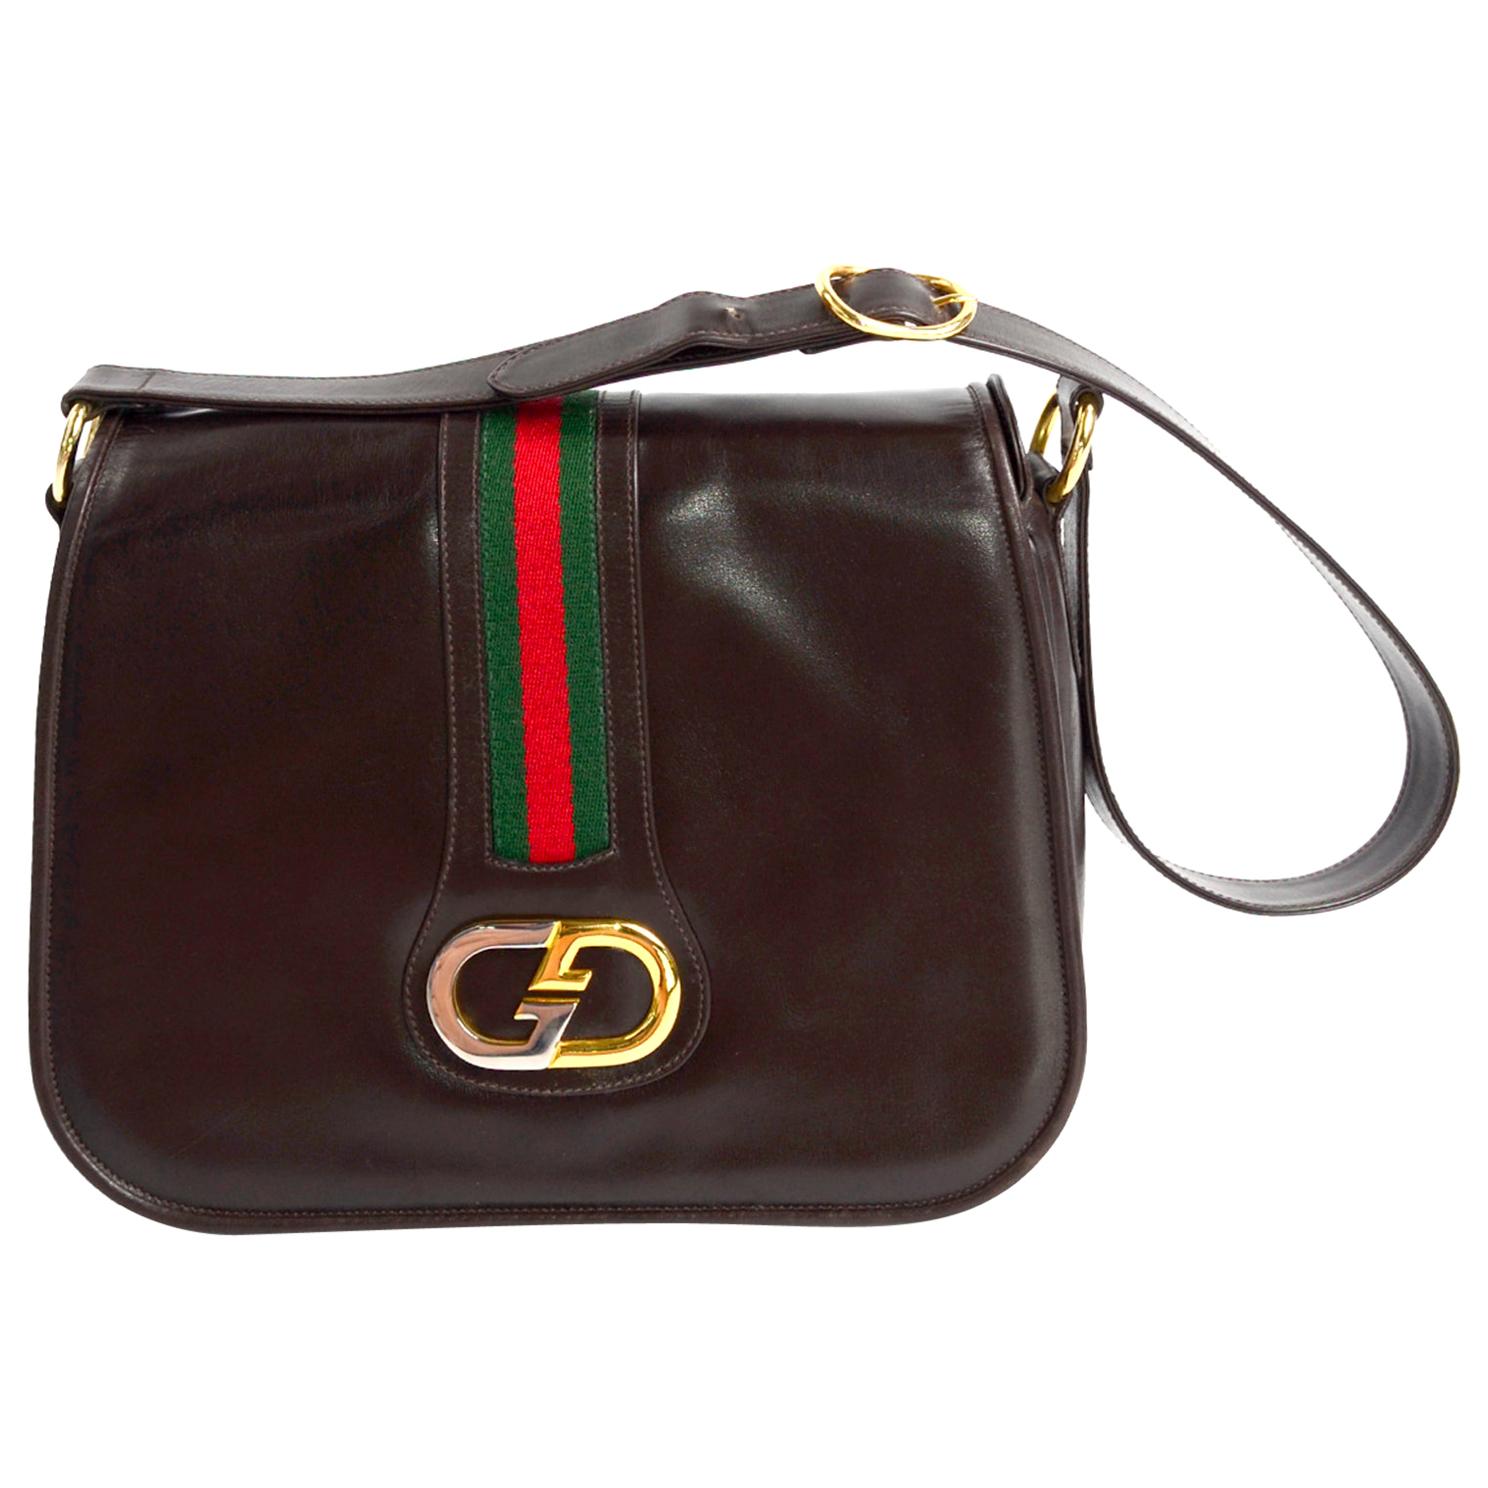 Discover 89+ vintage gucci bags 1970s - esthdonghoadian